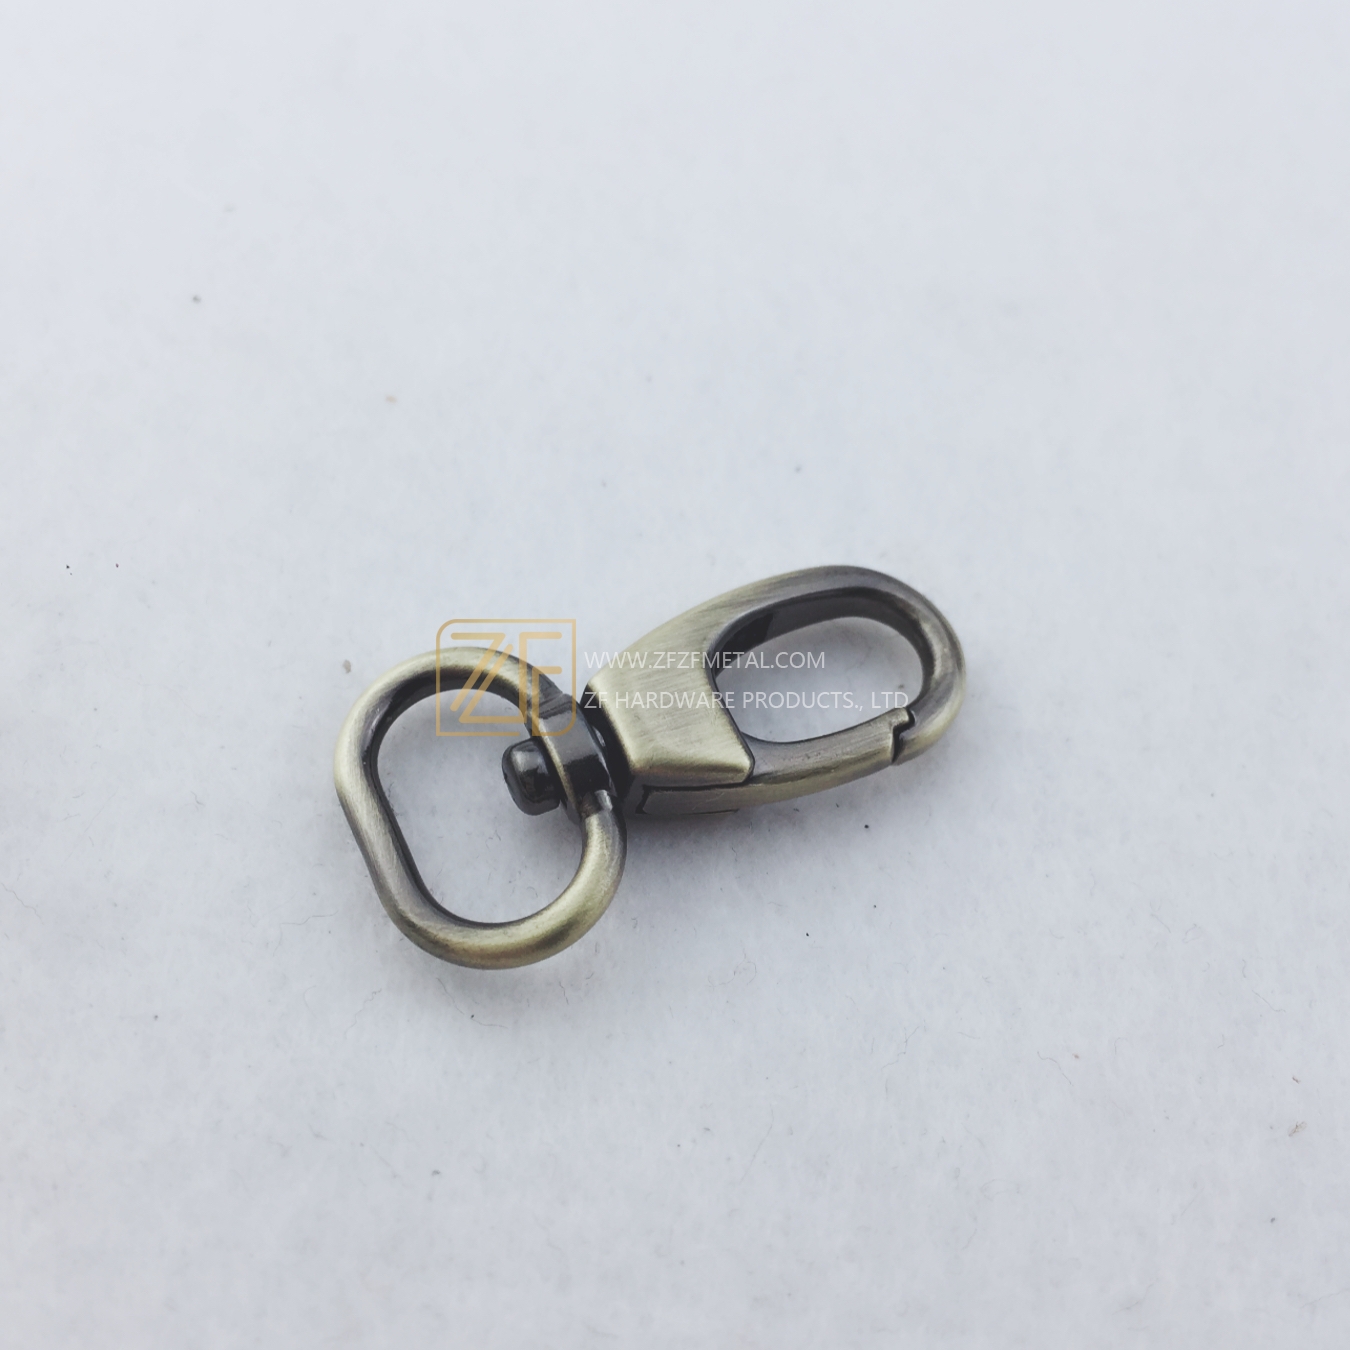 16mm Fashion Swivel Snap Hook for Bag Accessories